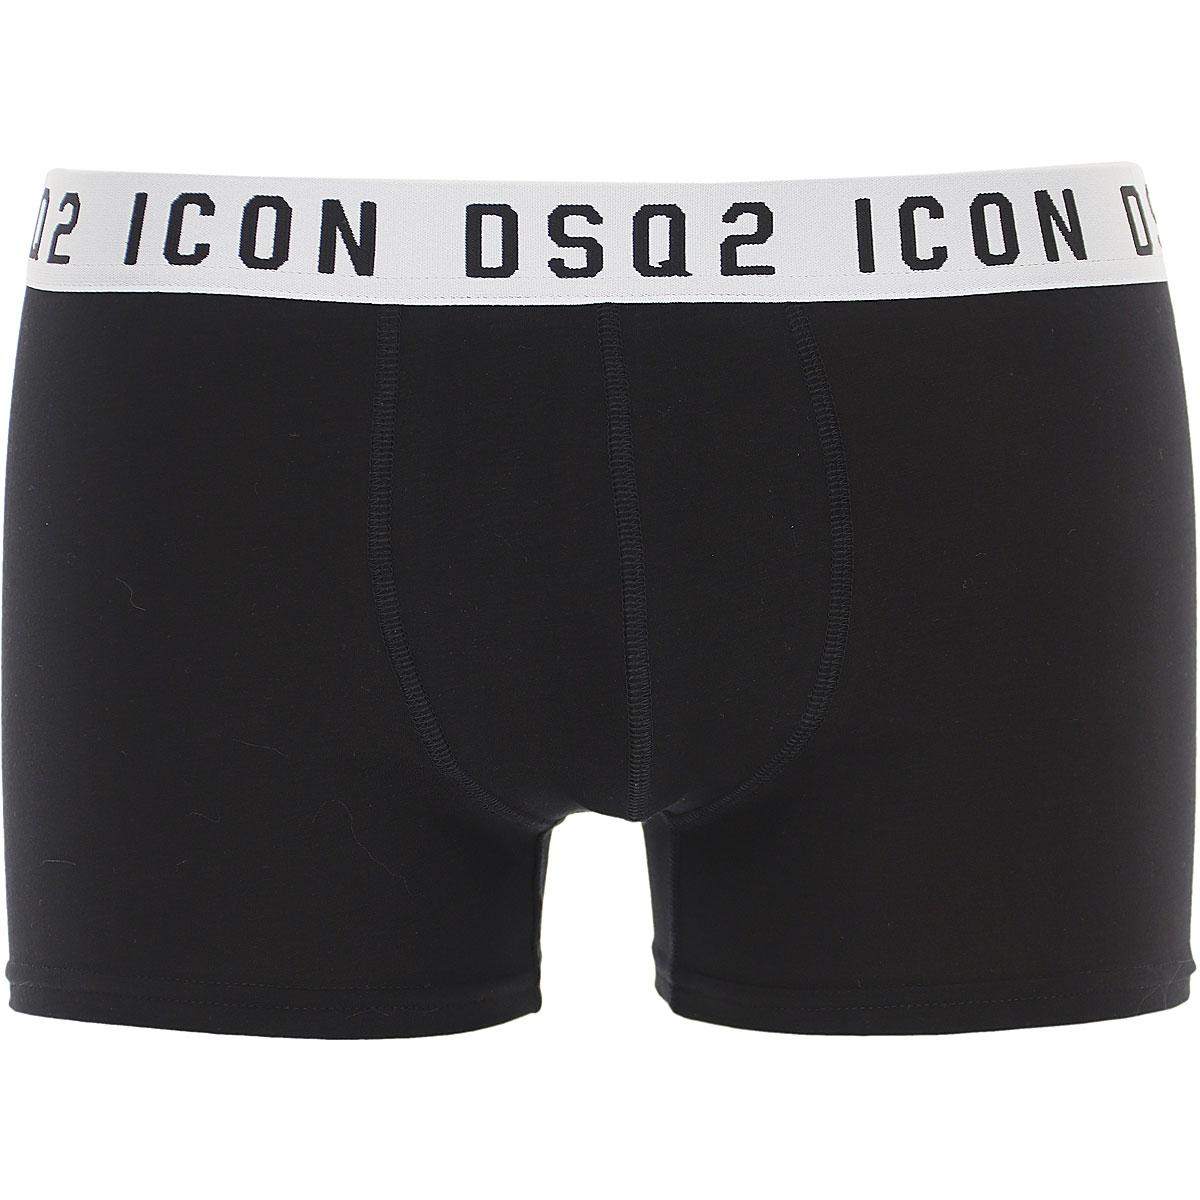 Mens Underwear Dsquared2, Style code: d9lc63450-010-